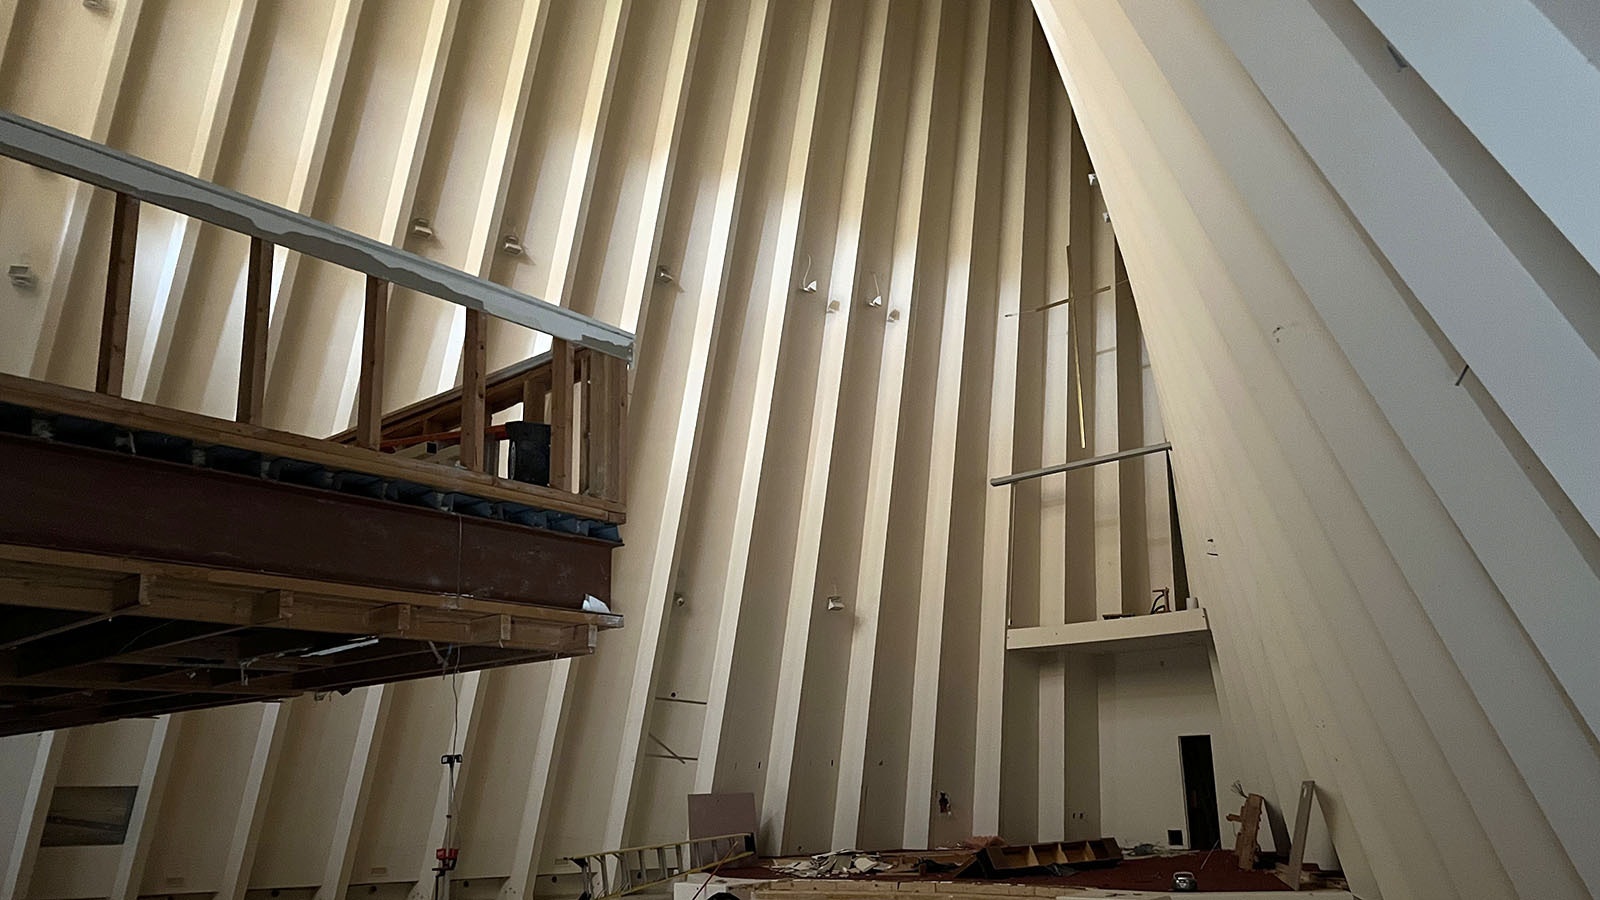 The soaring sanctuary of the First United Methodist Church in Laramie saw countless services and ceremonies over more than half a century. Now, it’s empty, gutted and awaiting demolition.